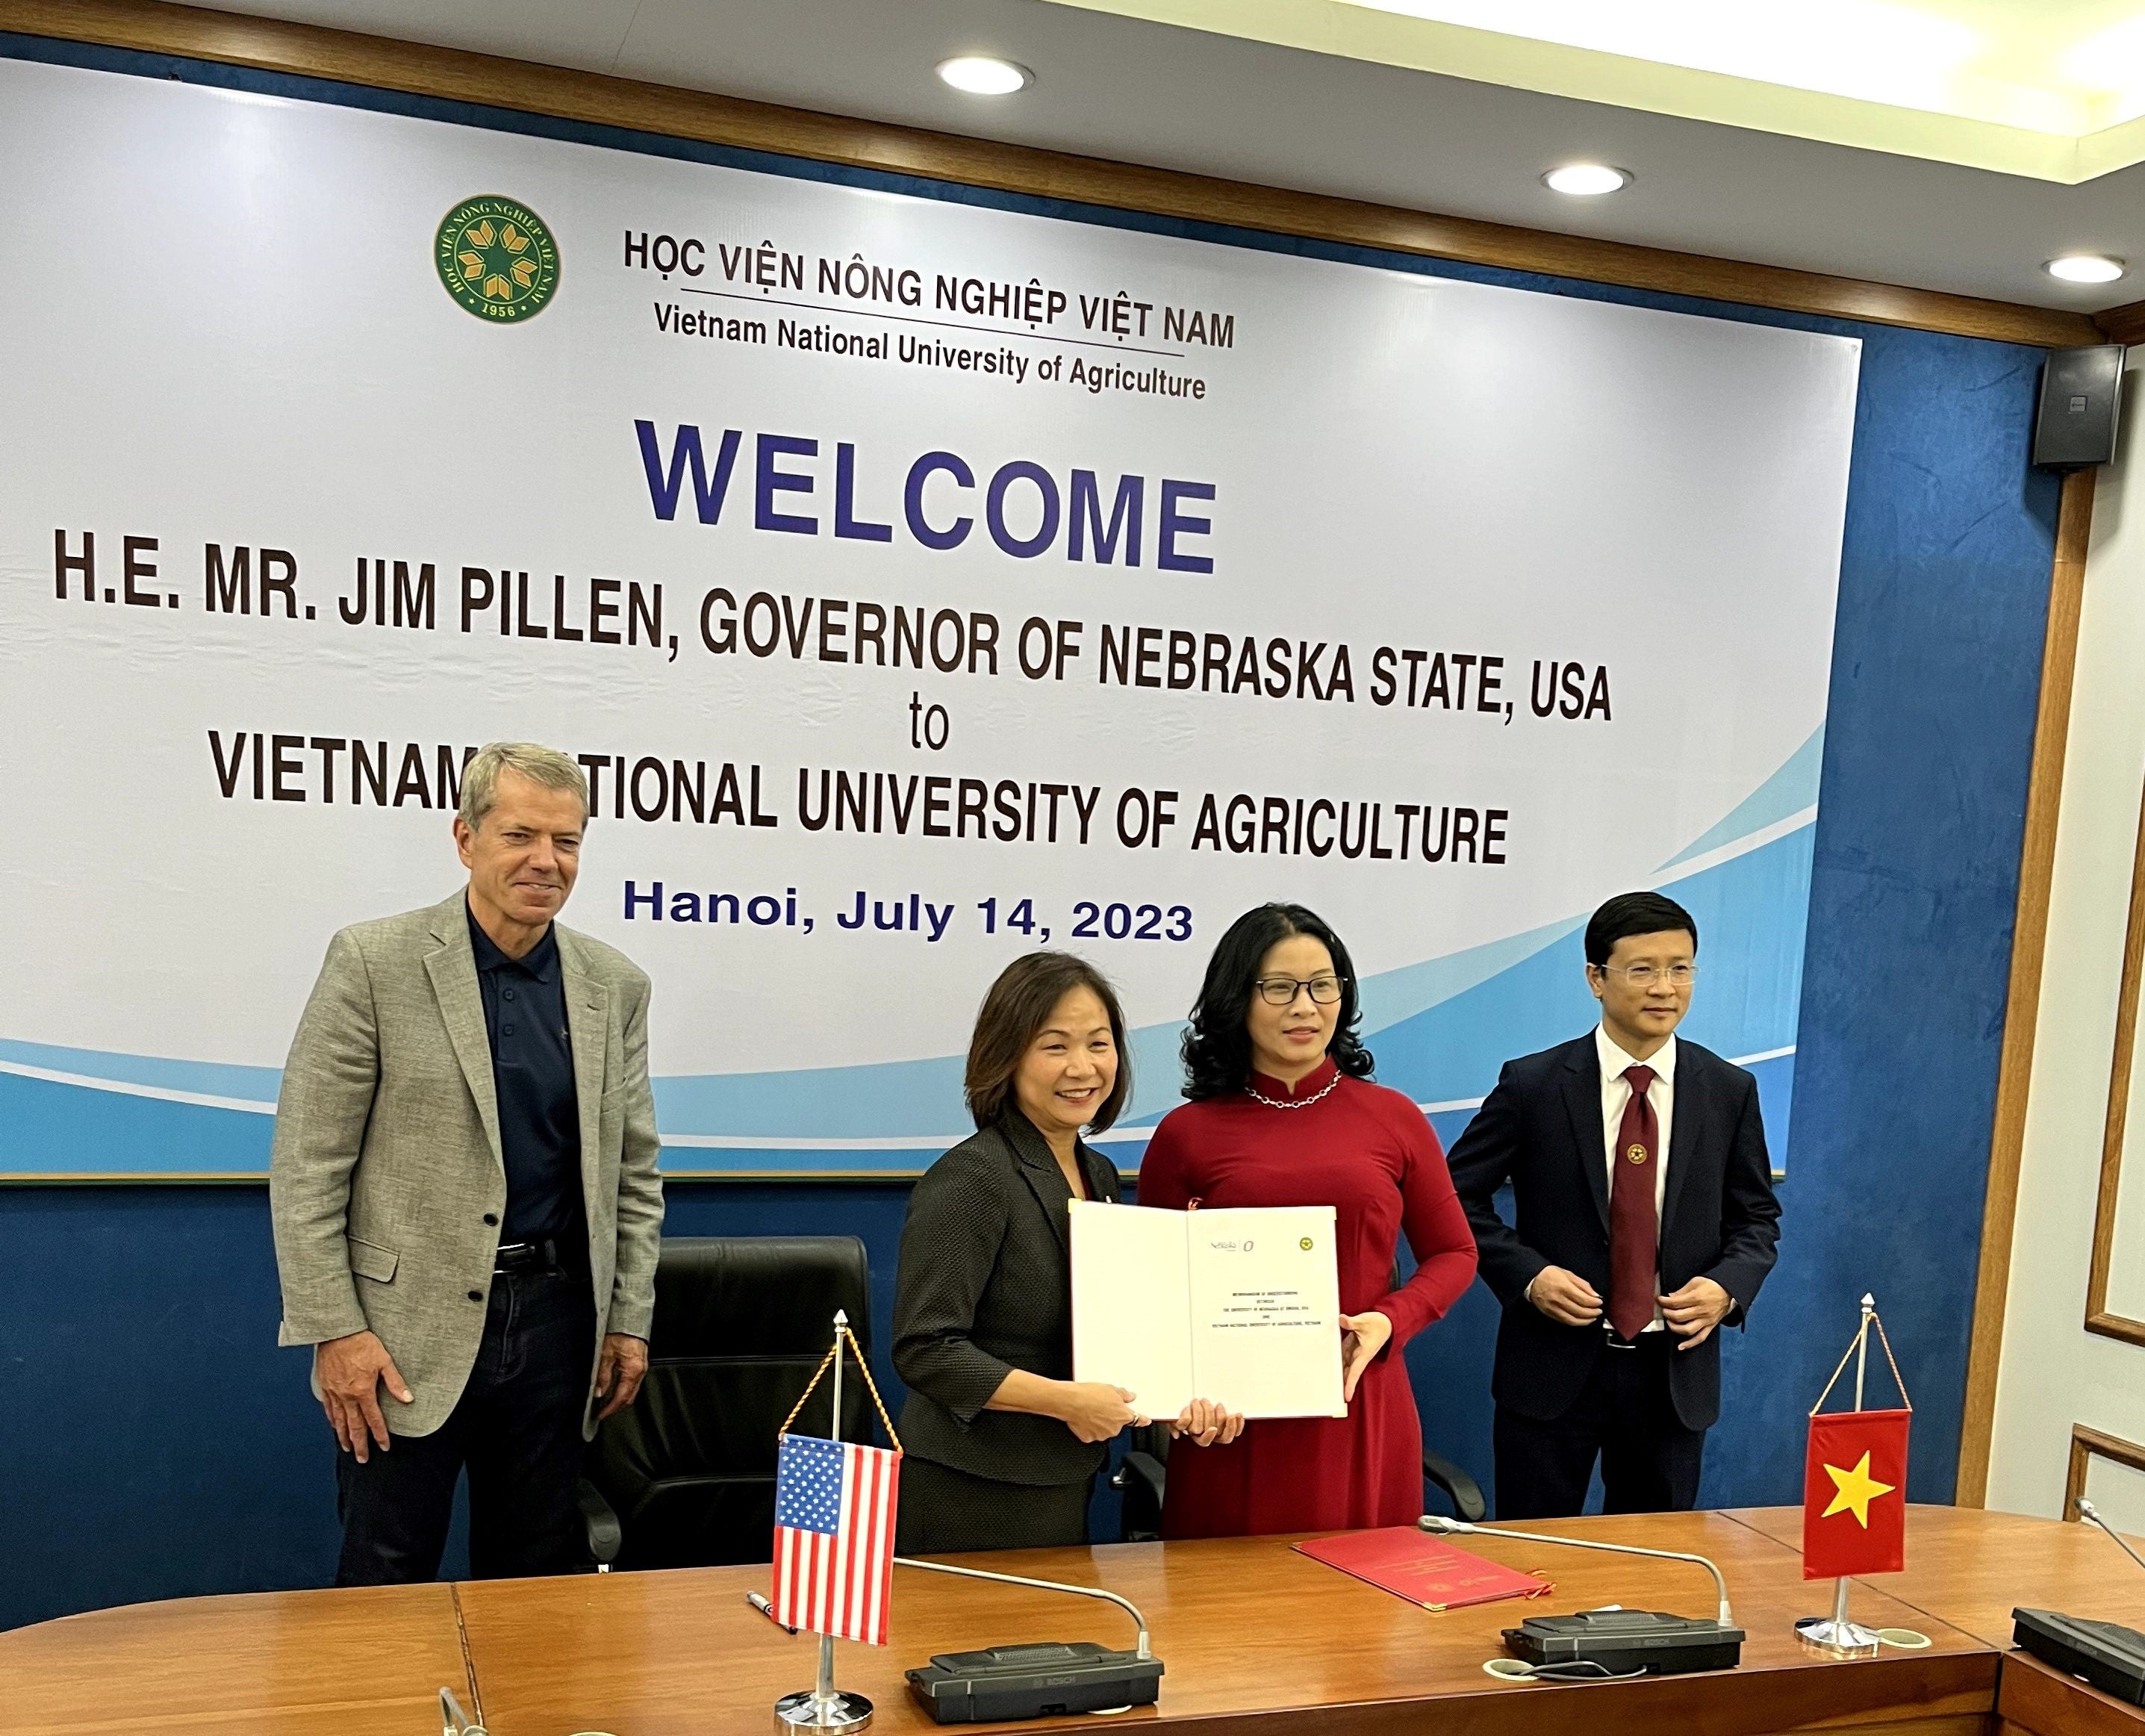 Gov. Pillen and Chancellor Li following signing of MOU at the Vietnam University of Agriculture